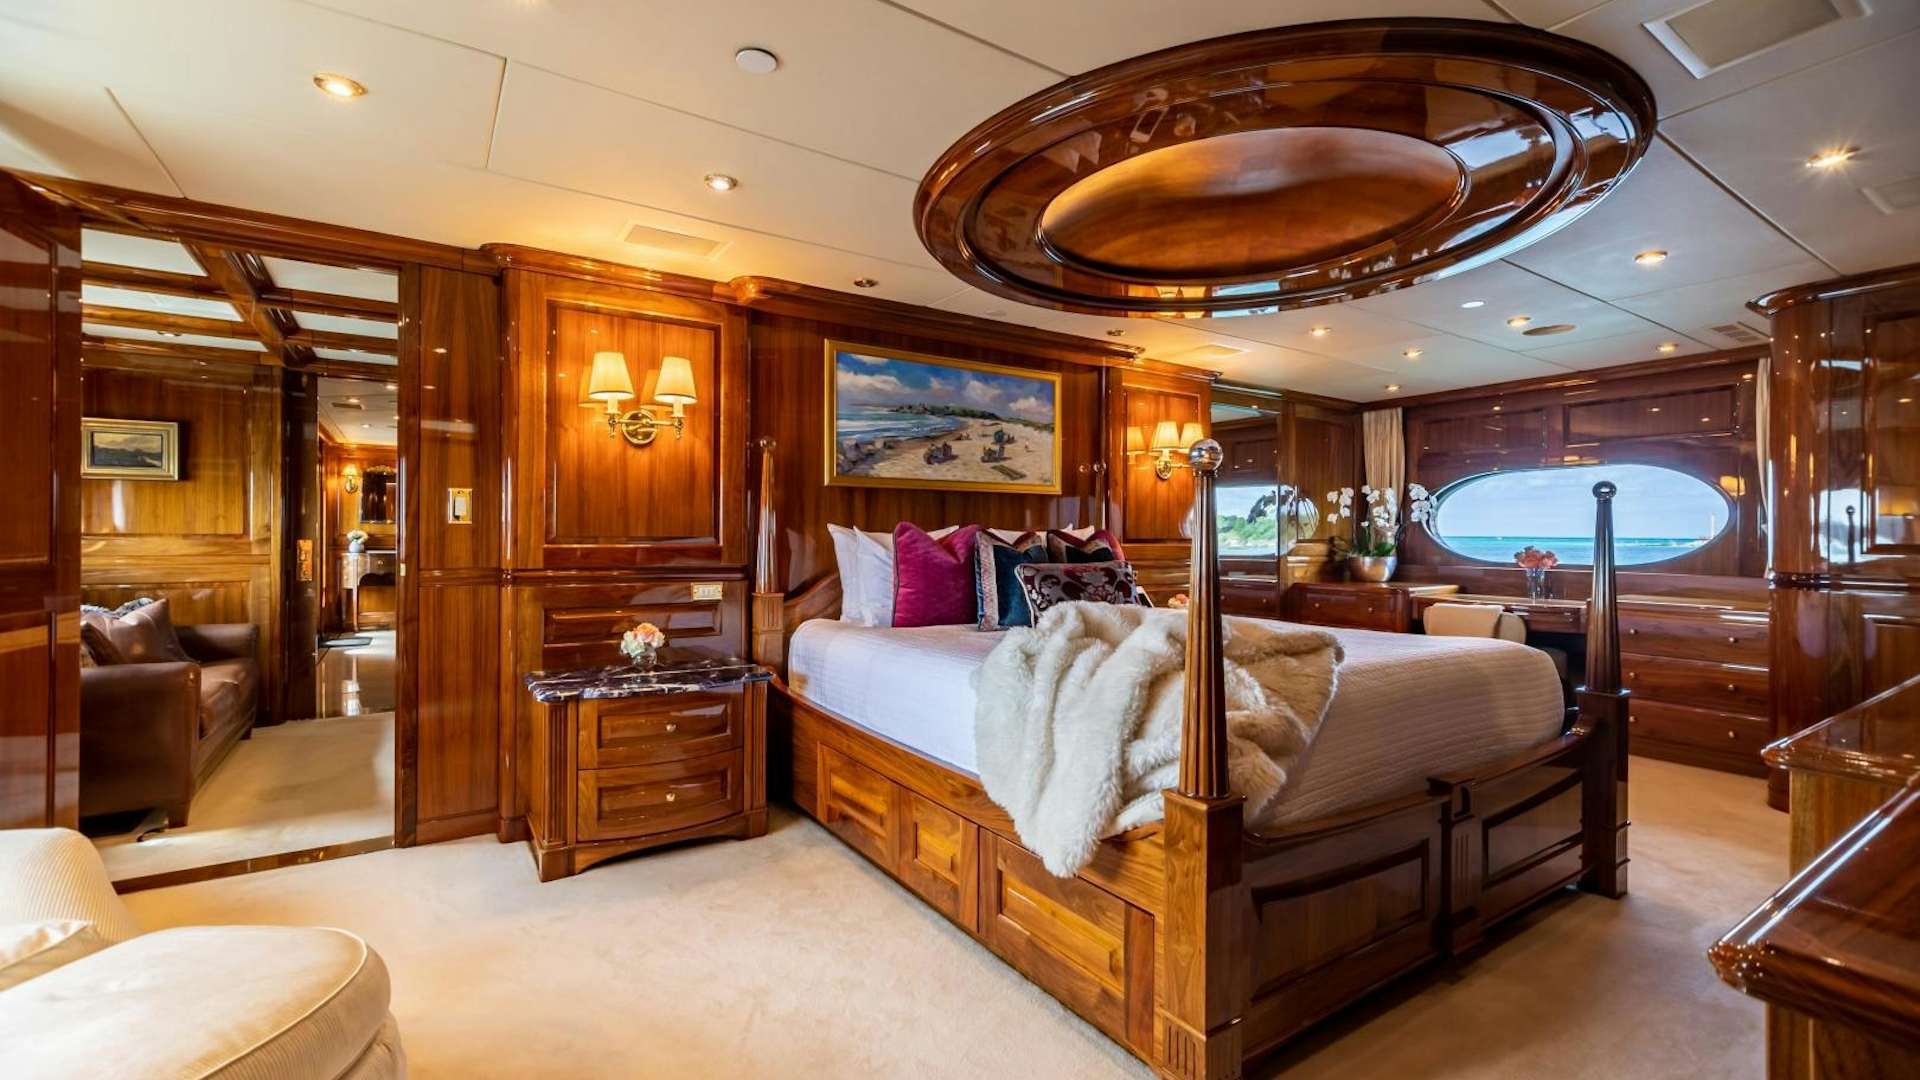 Amore
Yacht for Sale